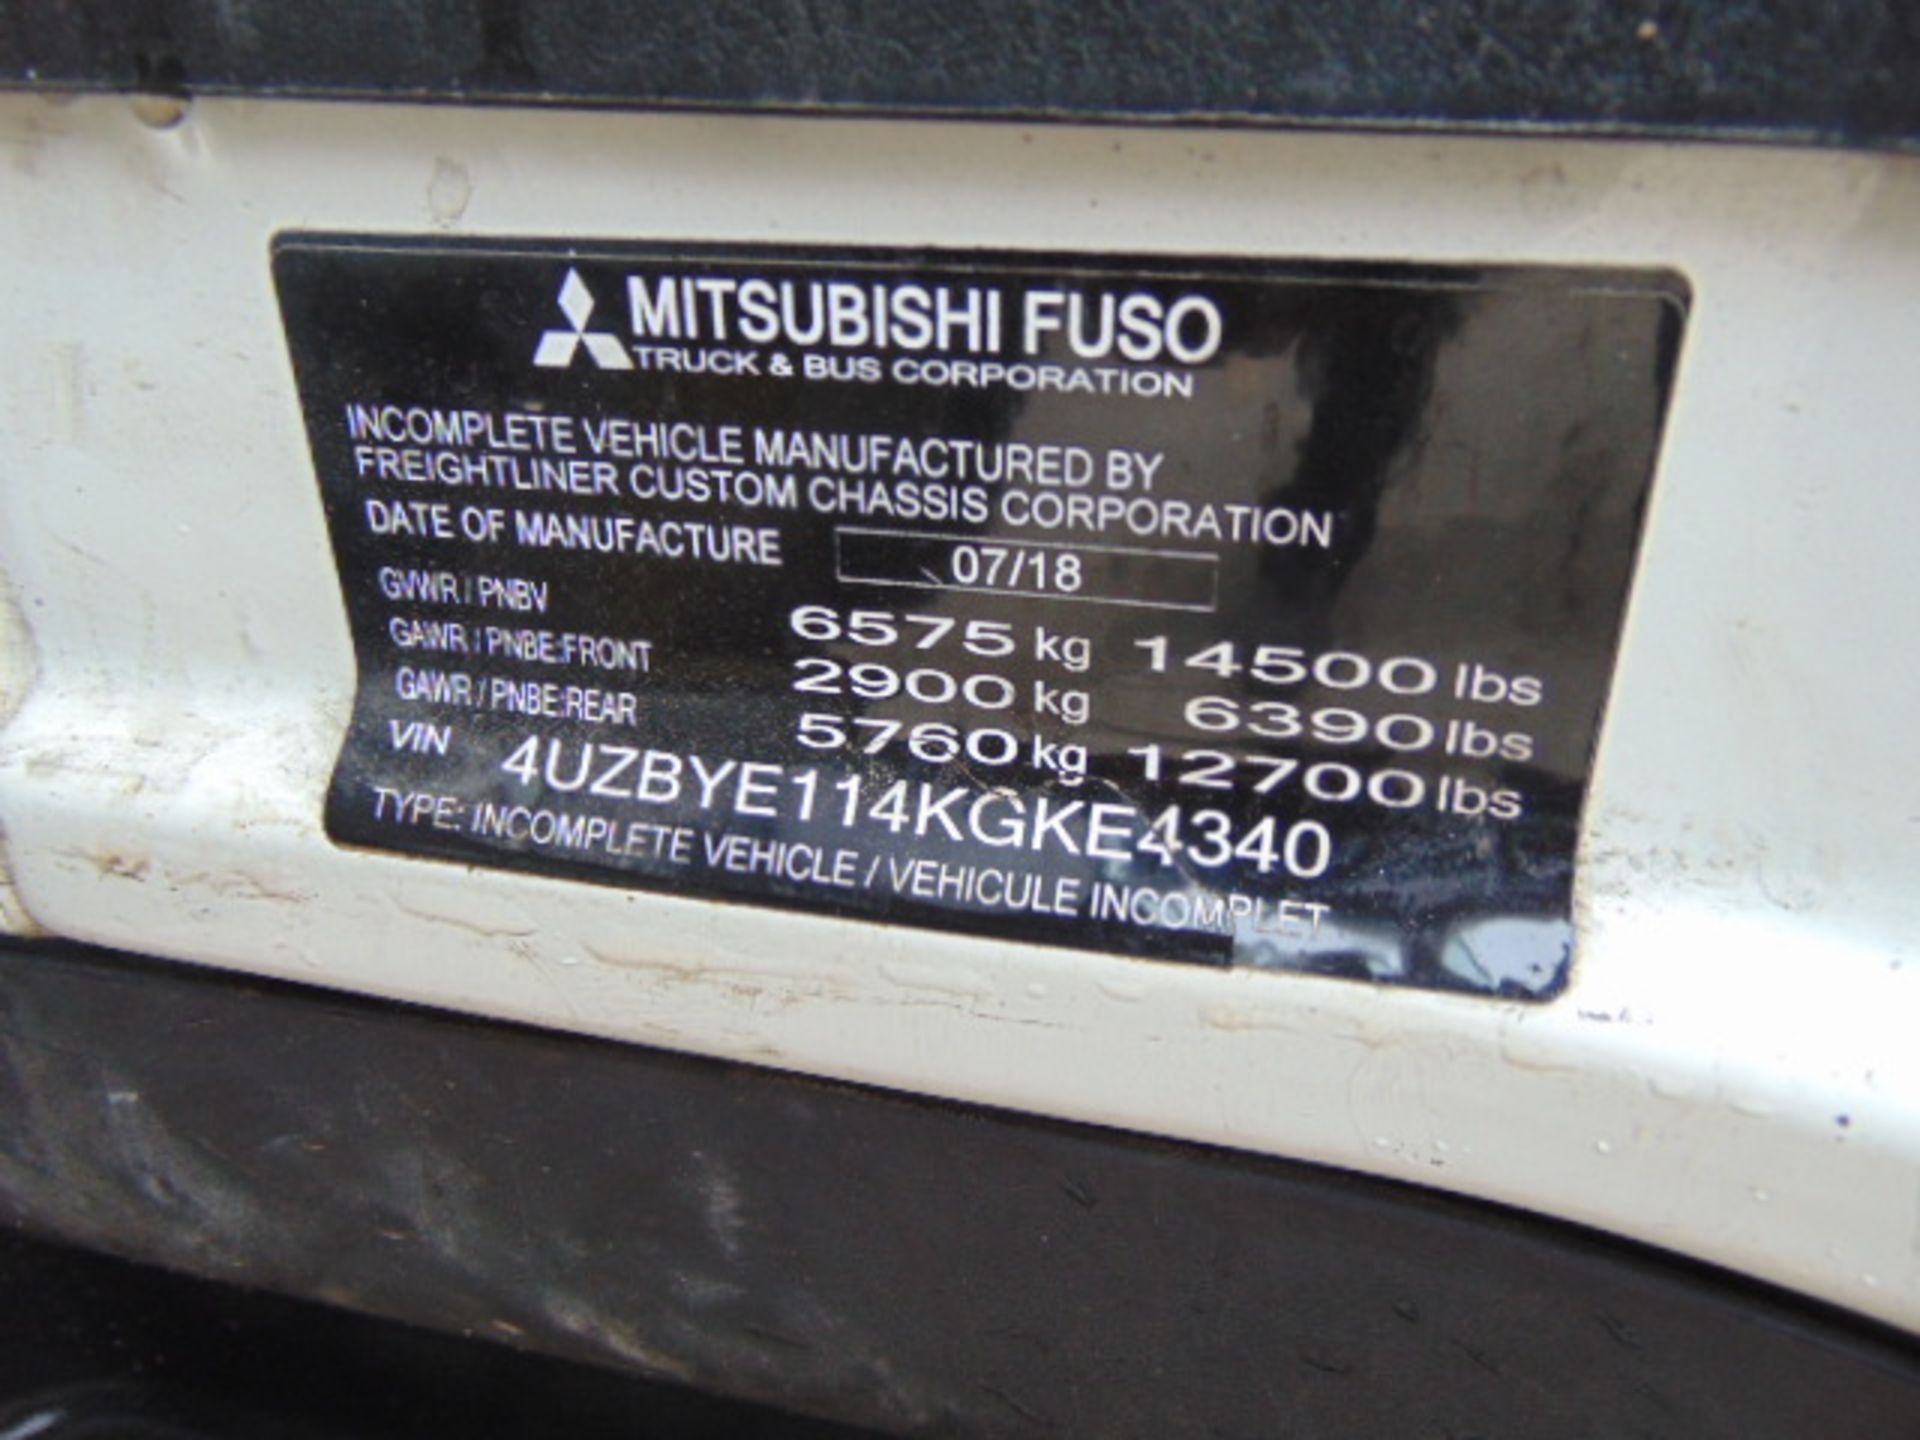 FLATBED WORK TRUCK, 2019 MITSUBISHI FUSO CANTER MDL. FE140, gasoline pwrd., auto. trans., approx. - Image 11 of 19